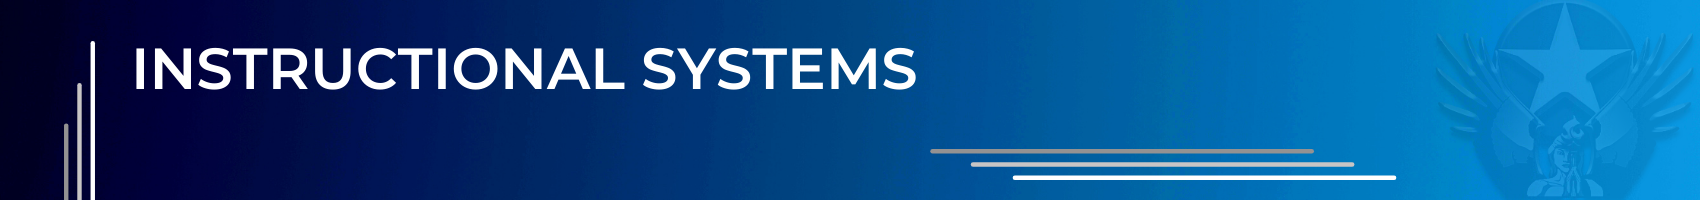 Instructional Systems banner